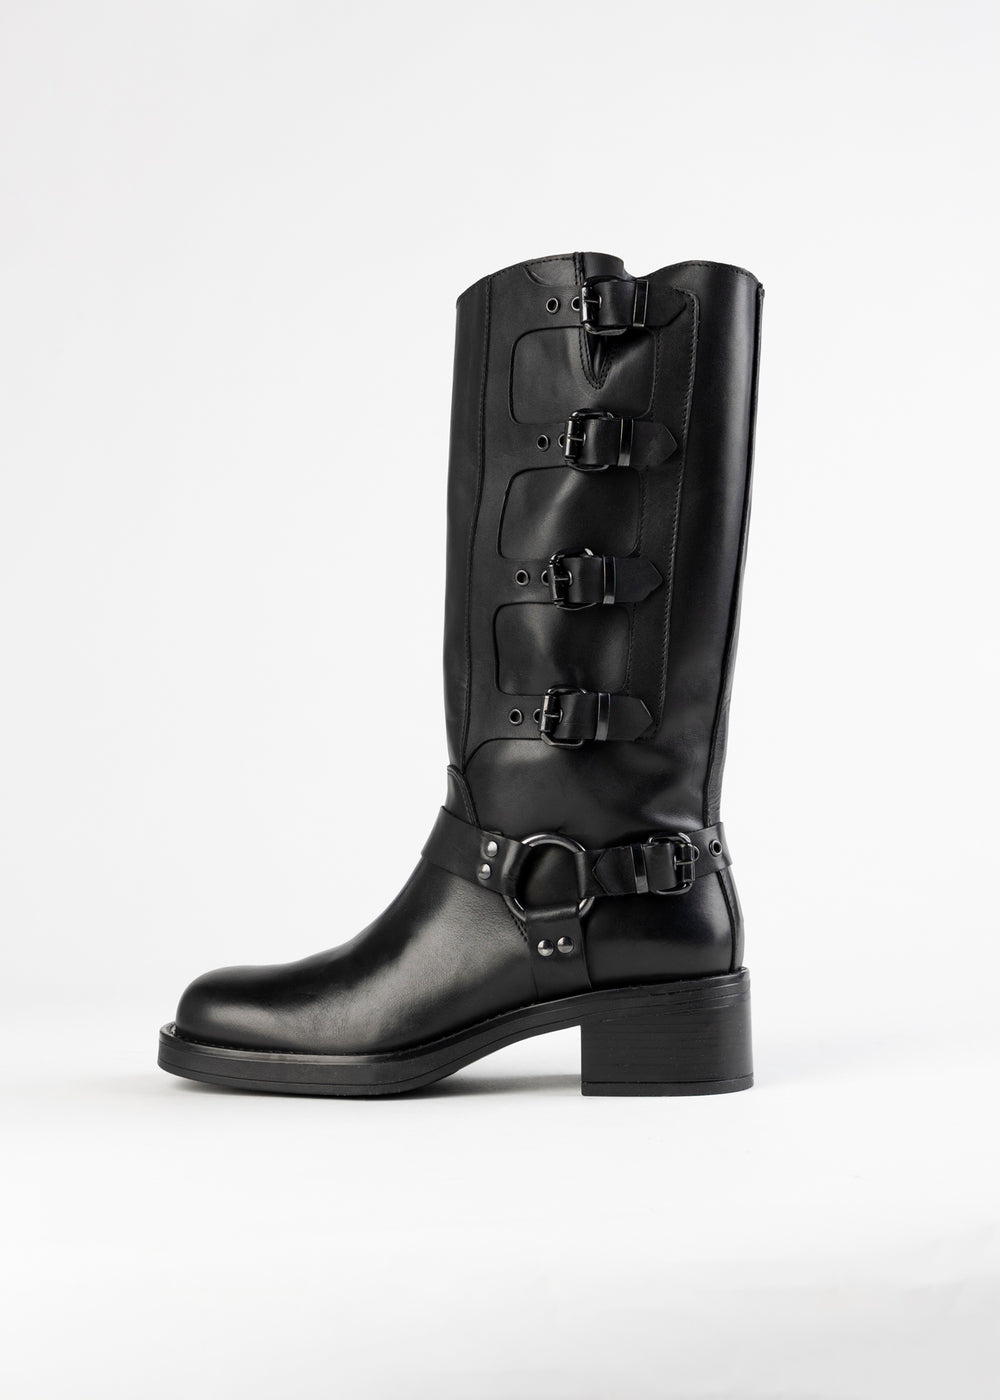 Shop Women's Boots & Booties | Latest Styles at Lori's Shoes